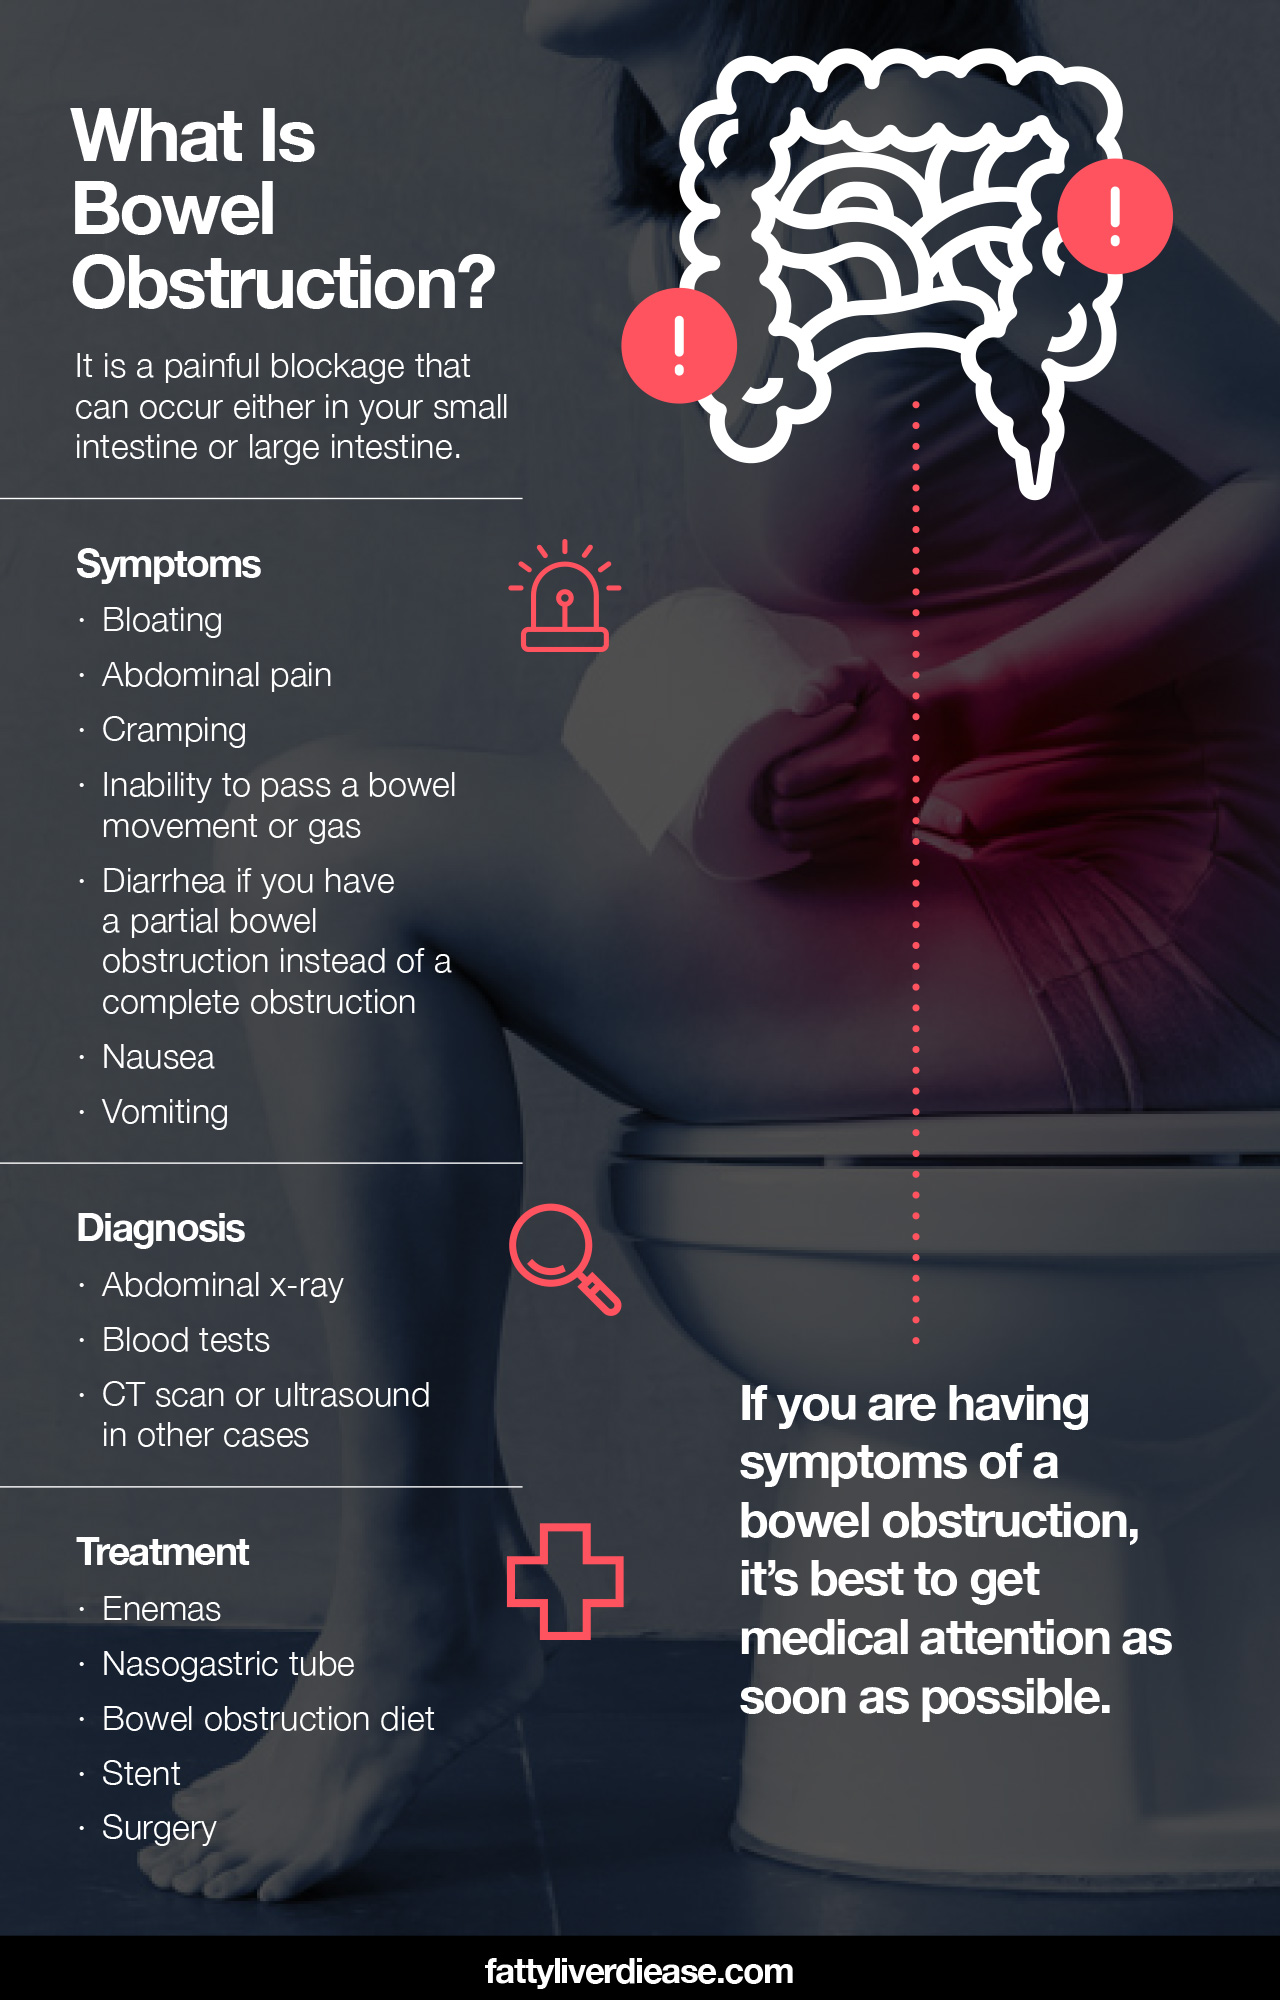 What is Bowel Obstruction